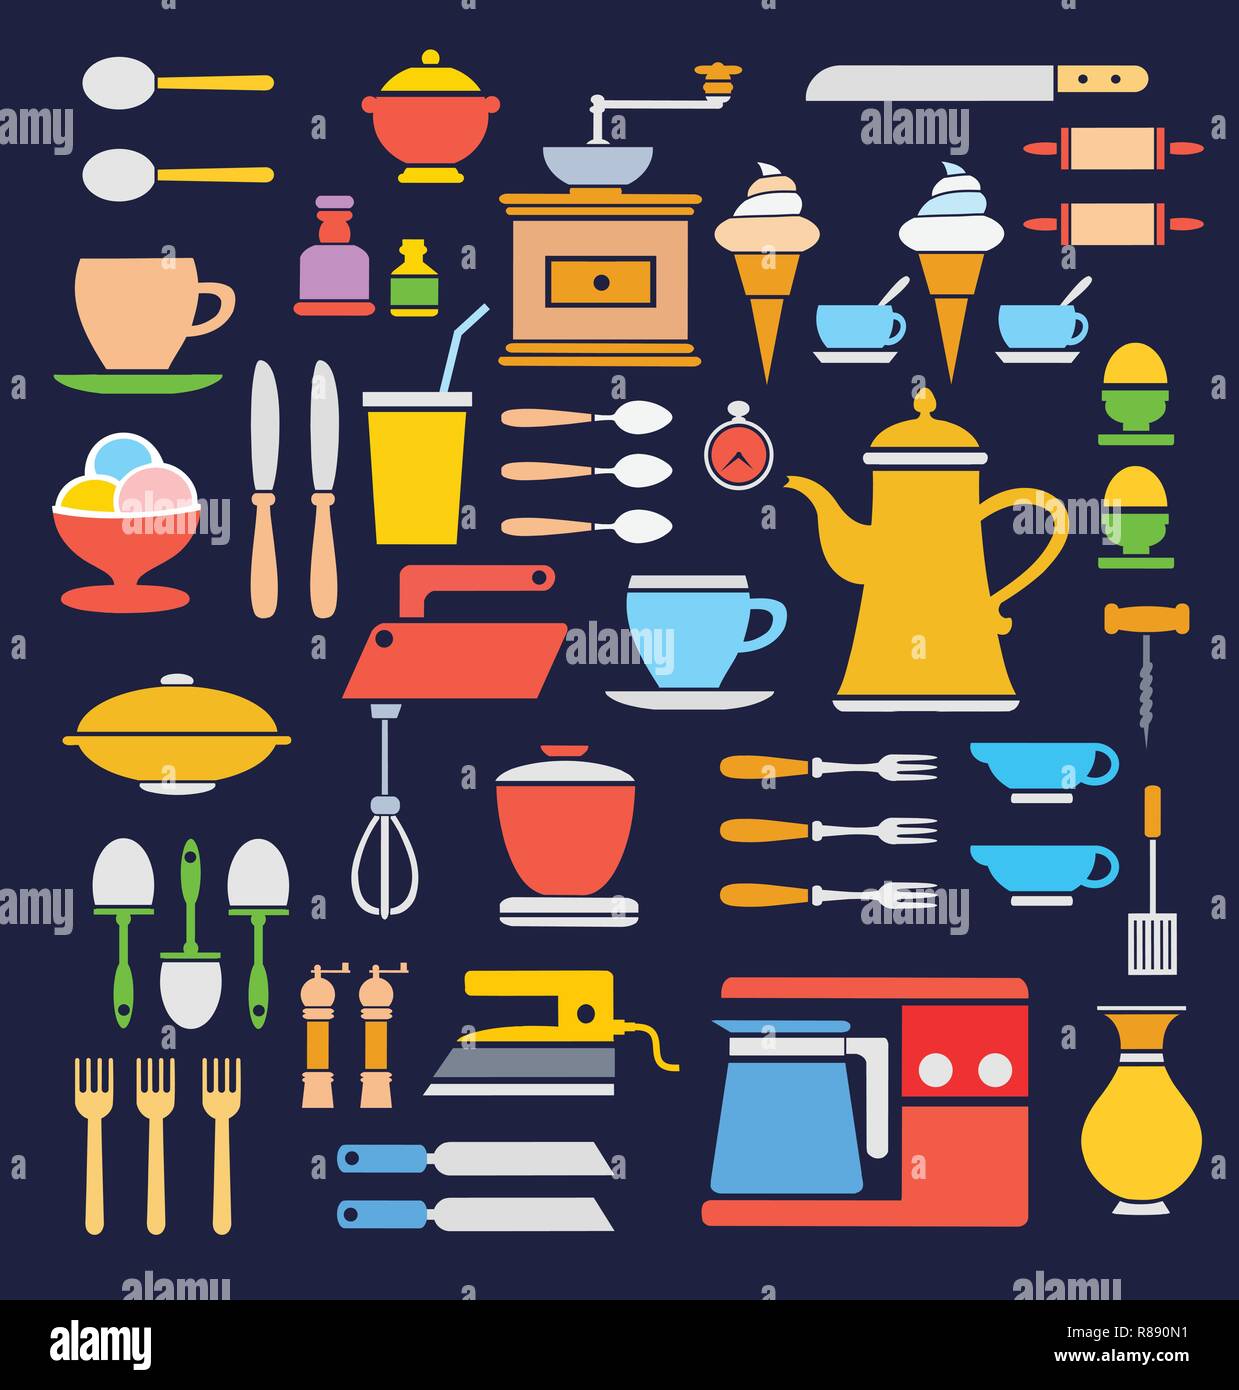 A set of kitchen kitchenware utensils of different colors ...